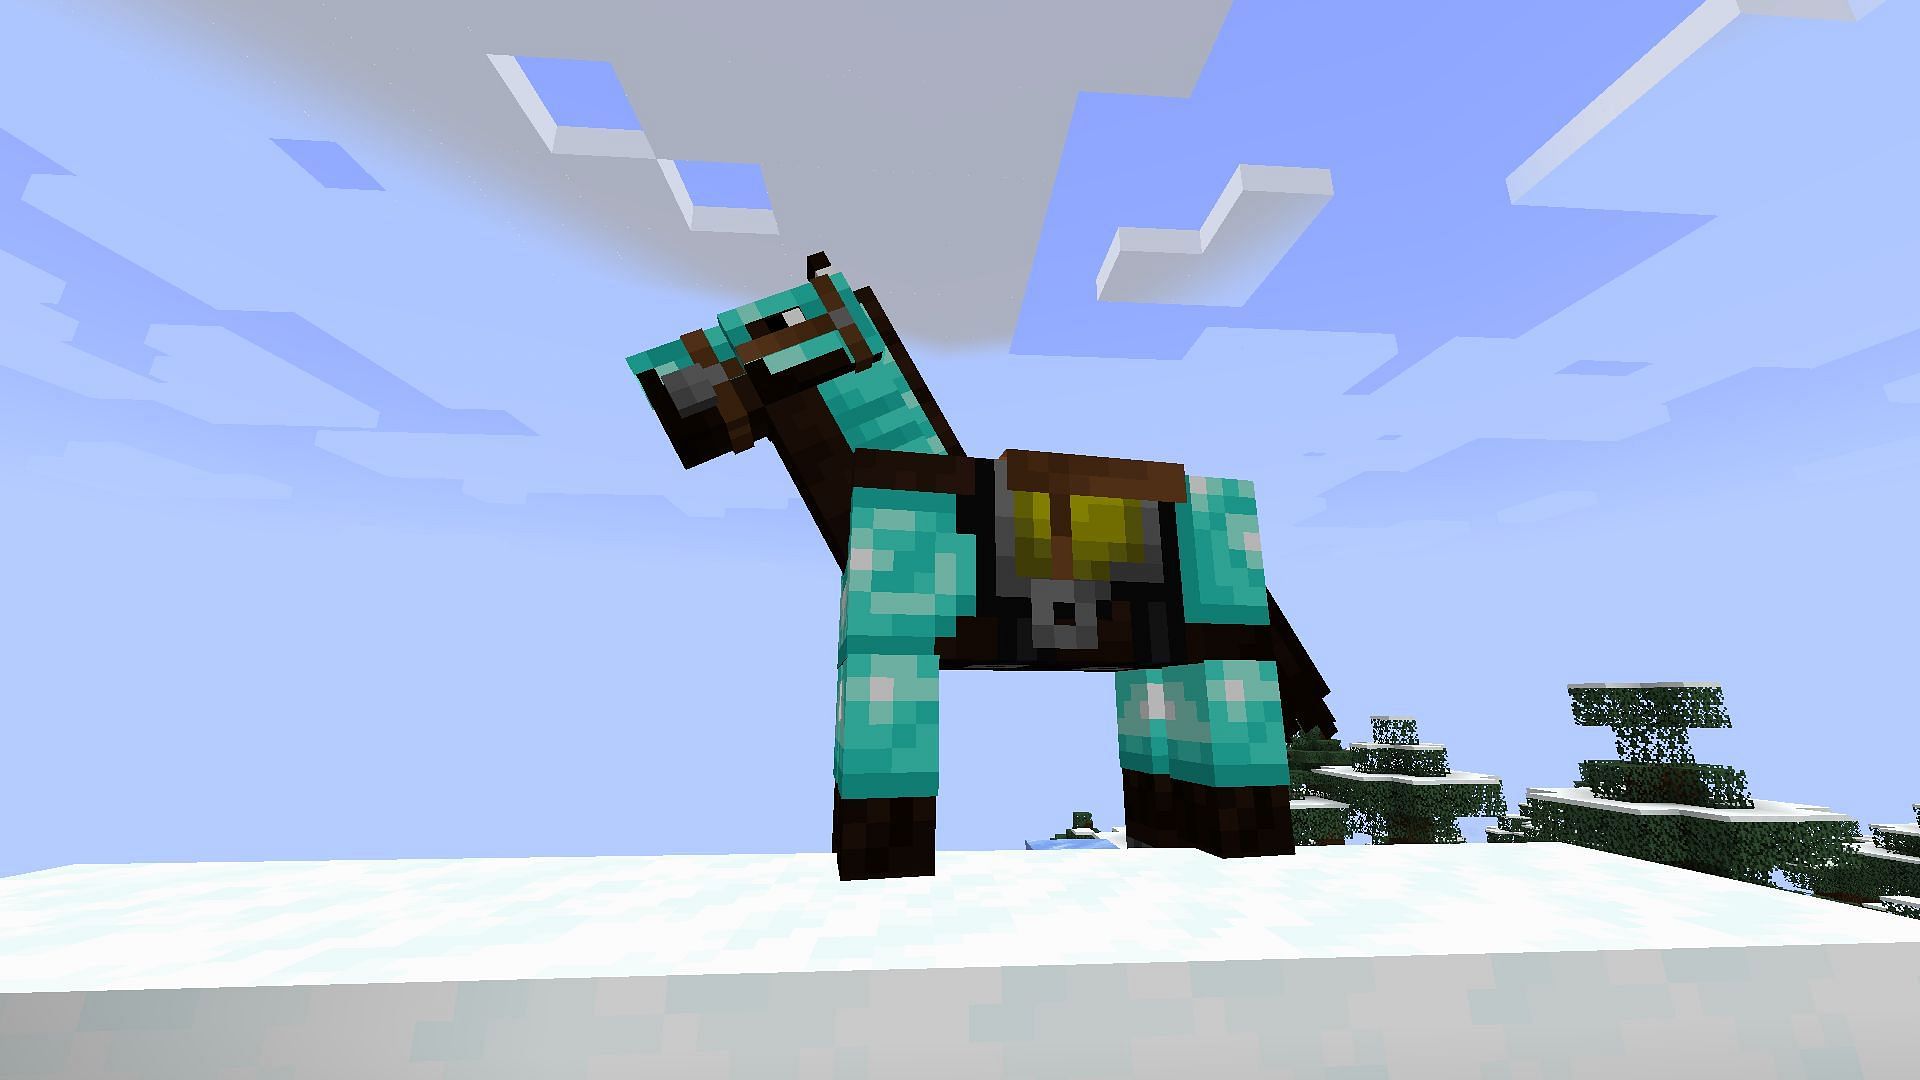 Travel on a horse to easily spot the trail ruins in Minecraft 1.20 update (Image via Mojang)